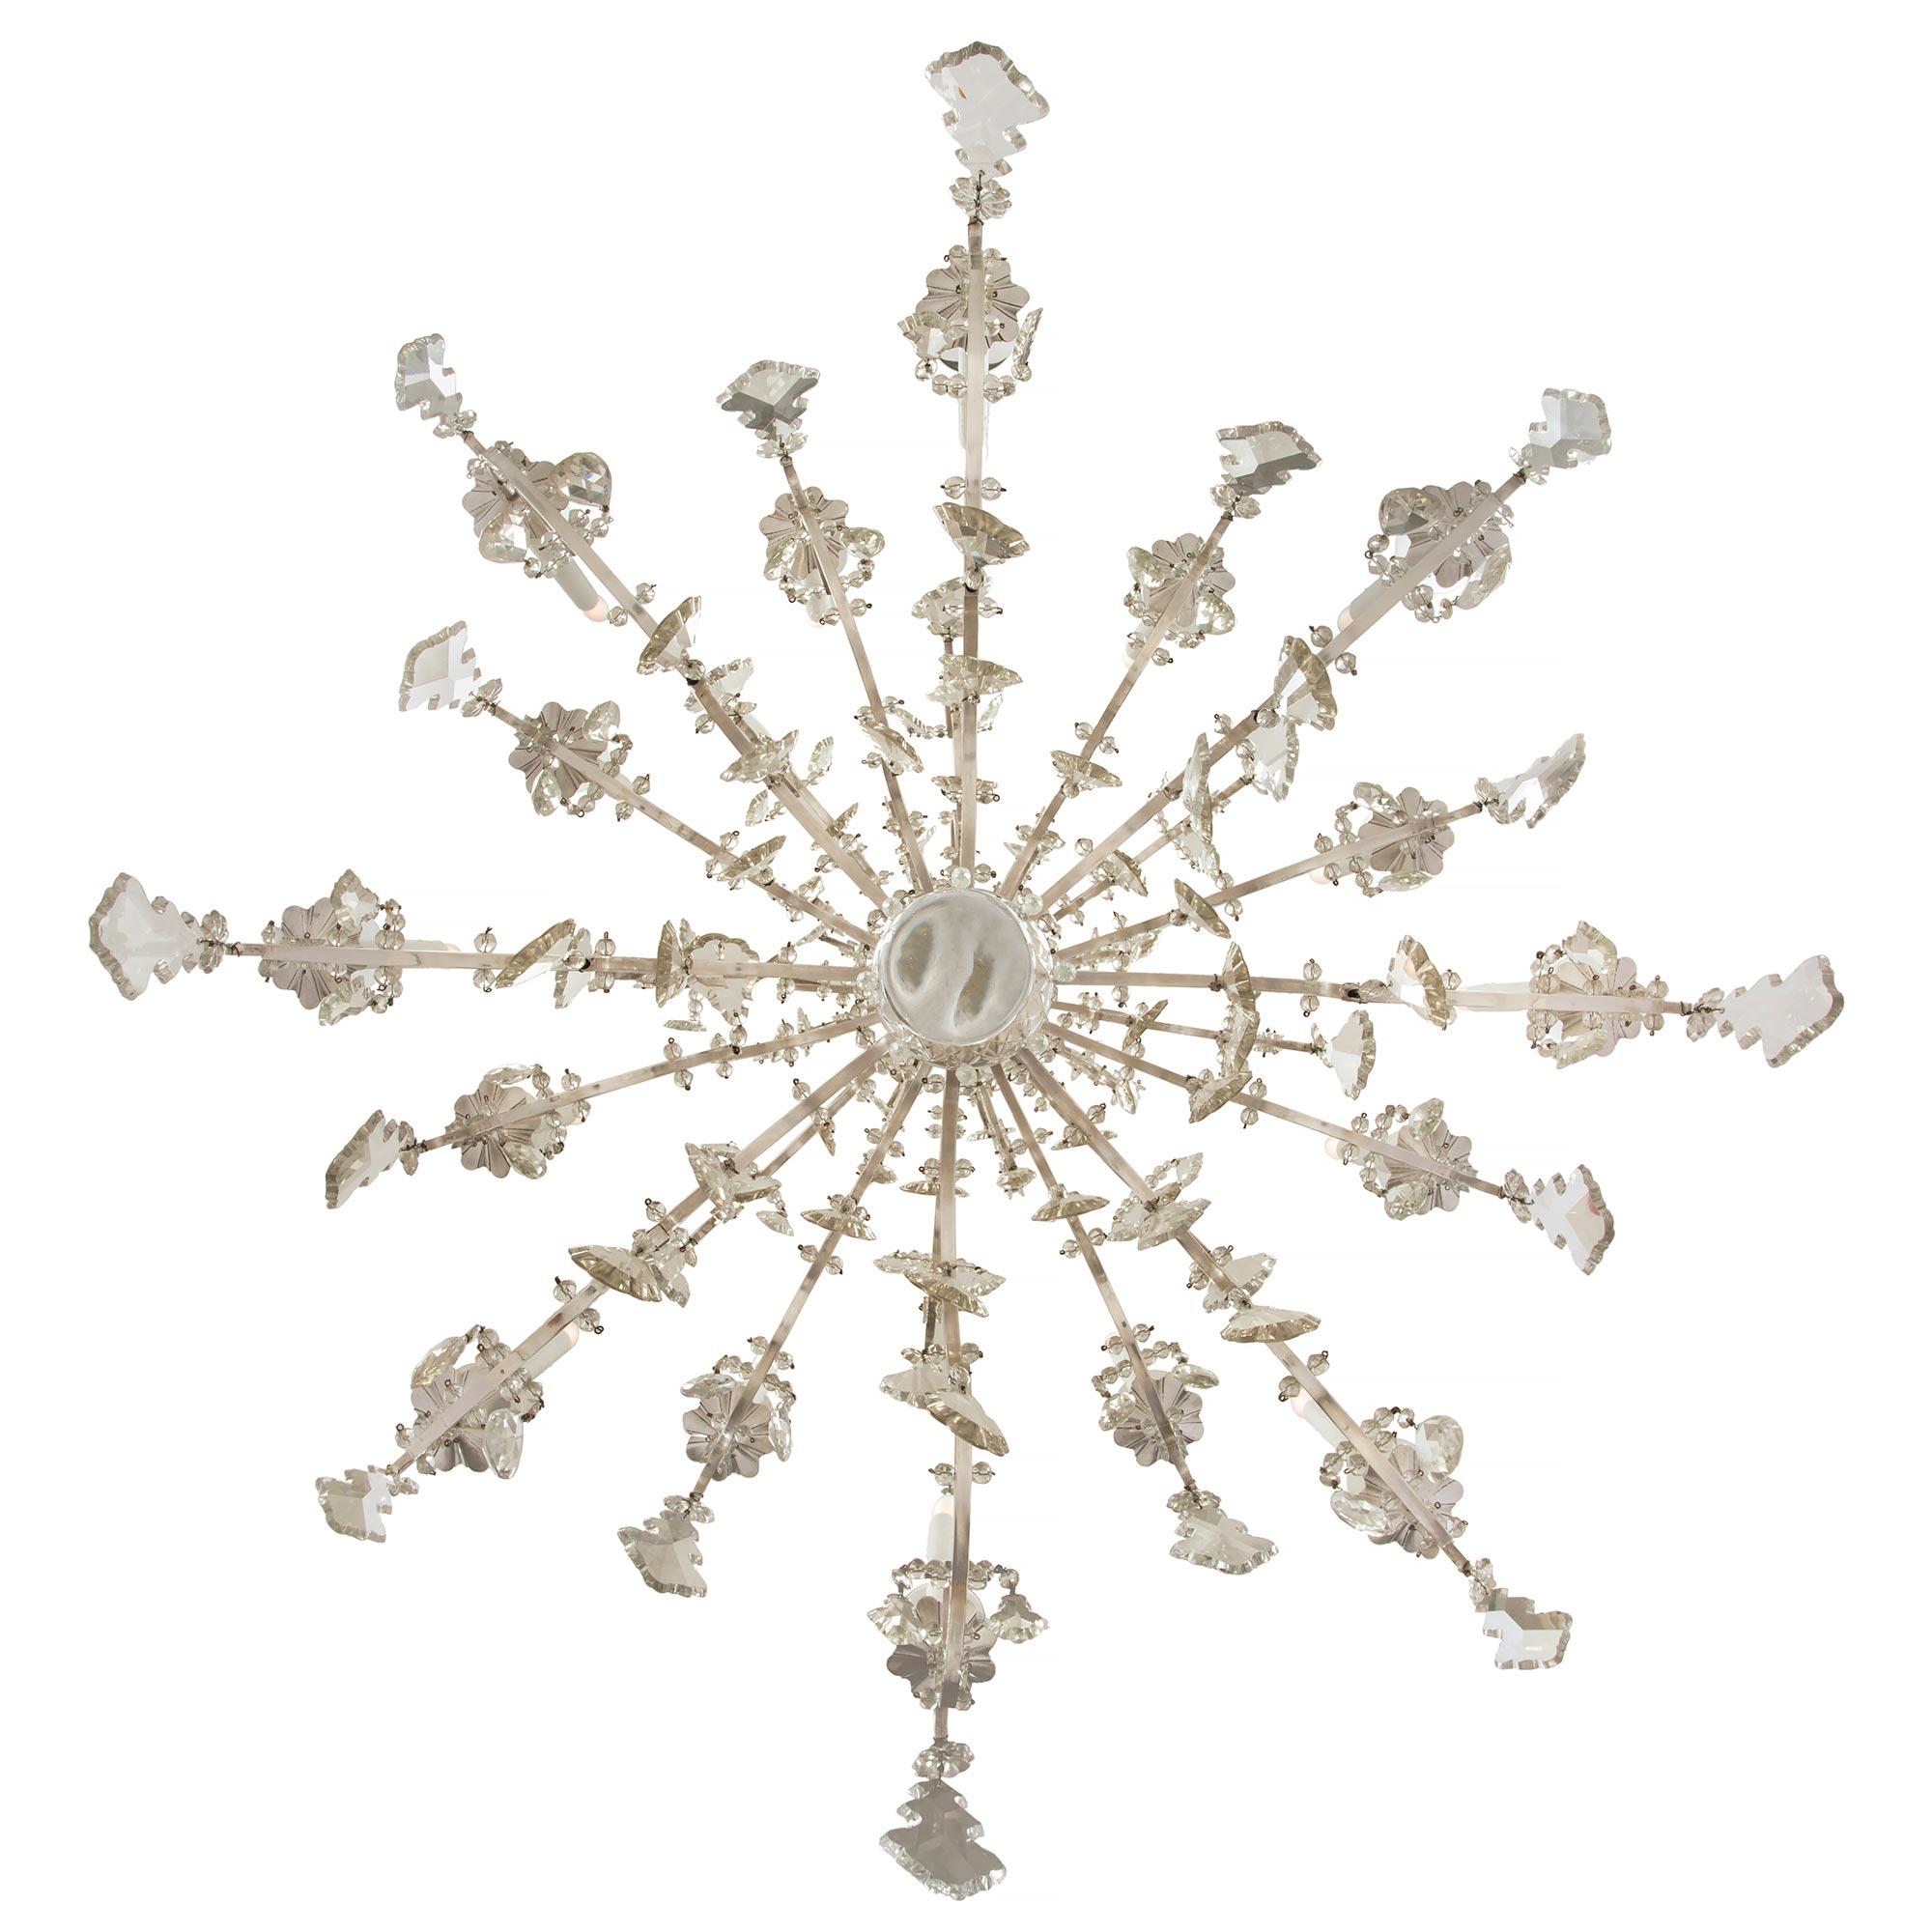 An outstanding French 19th century Louis XV style silvered bronze and Baccarat, attributed, crystal sixteen light two tier chandelier. The chandelier is centred by a bottom solid crystal ball amidst prism shaped cut crystal pendants. The beautiful S